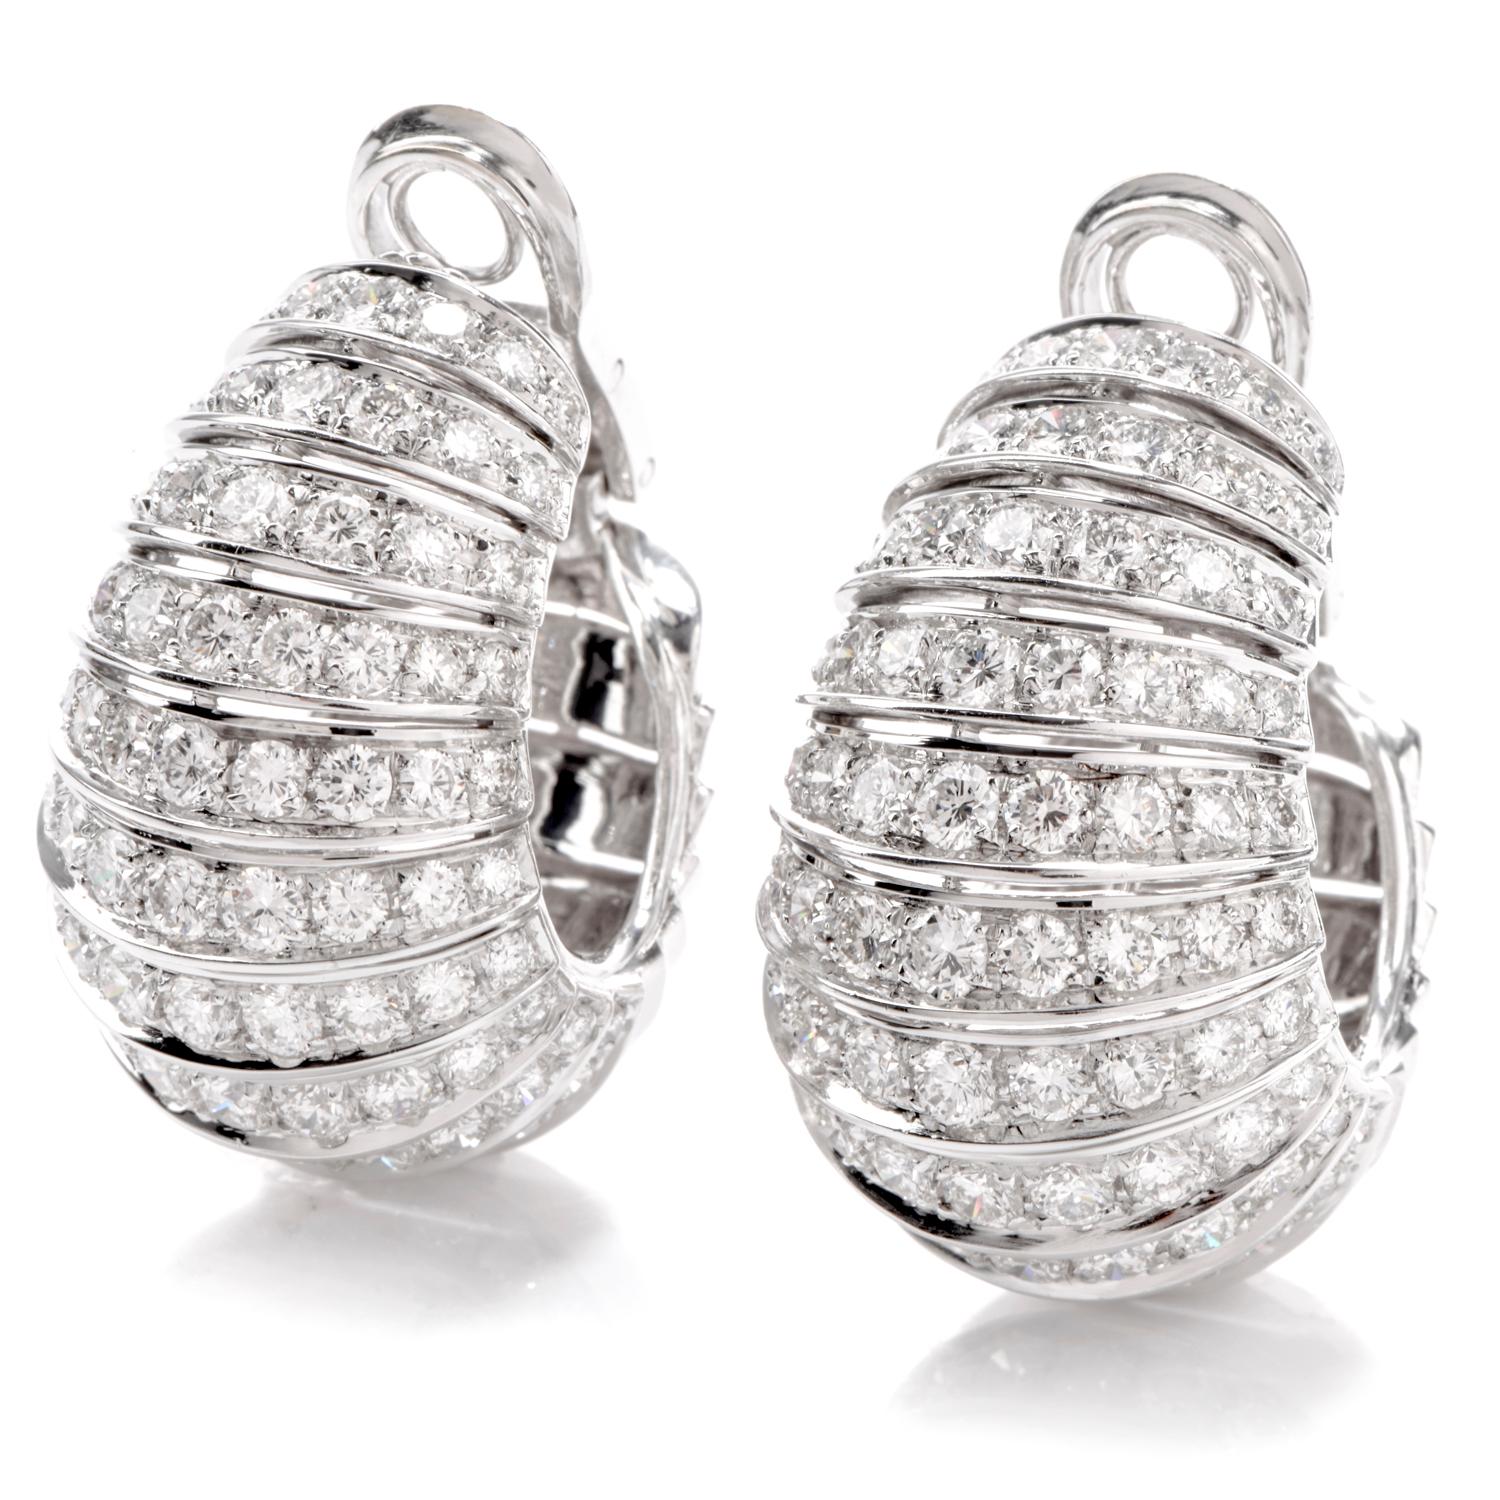 These earrings were created with an unbridled imagination and

inspired by a shell  motif. Exclusively hand Crafted in 18K white gold, 

these hoop earrings measure appx. 19.23mm wide x 30mm long.  

Rows of vibrant white diamonds cascade down

the